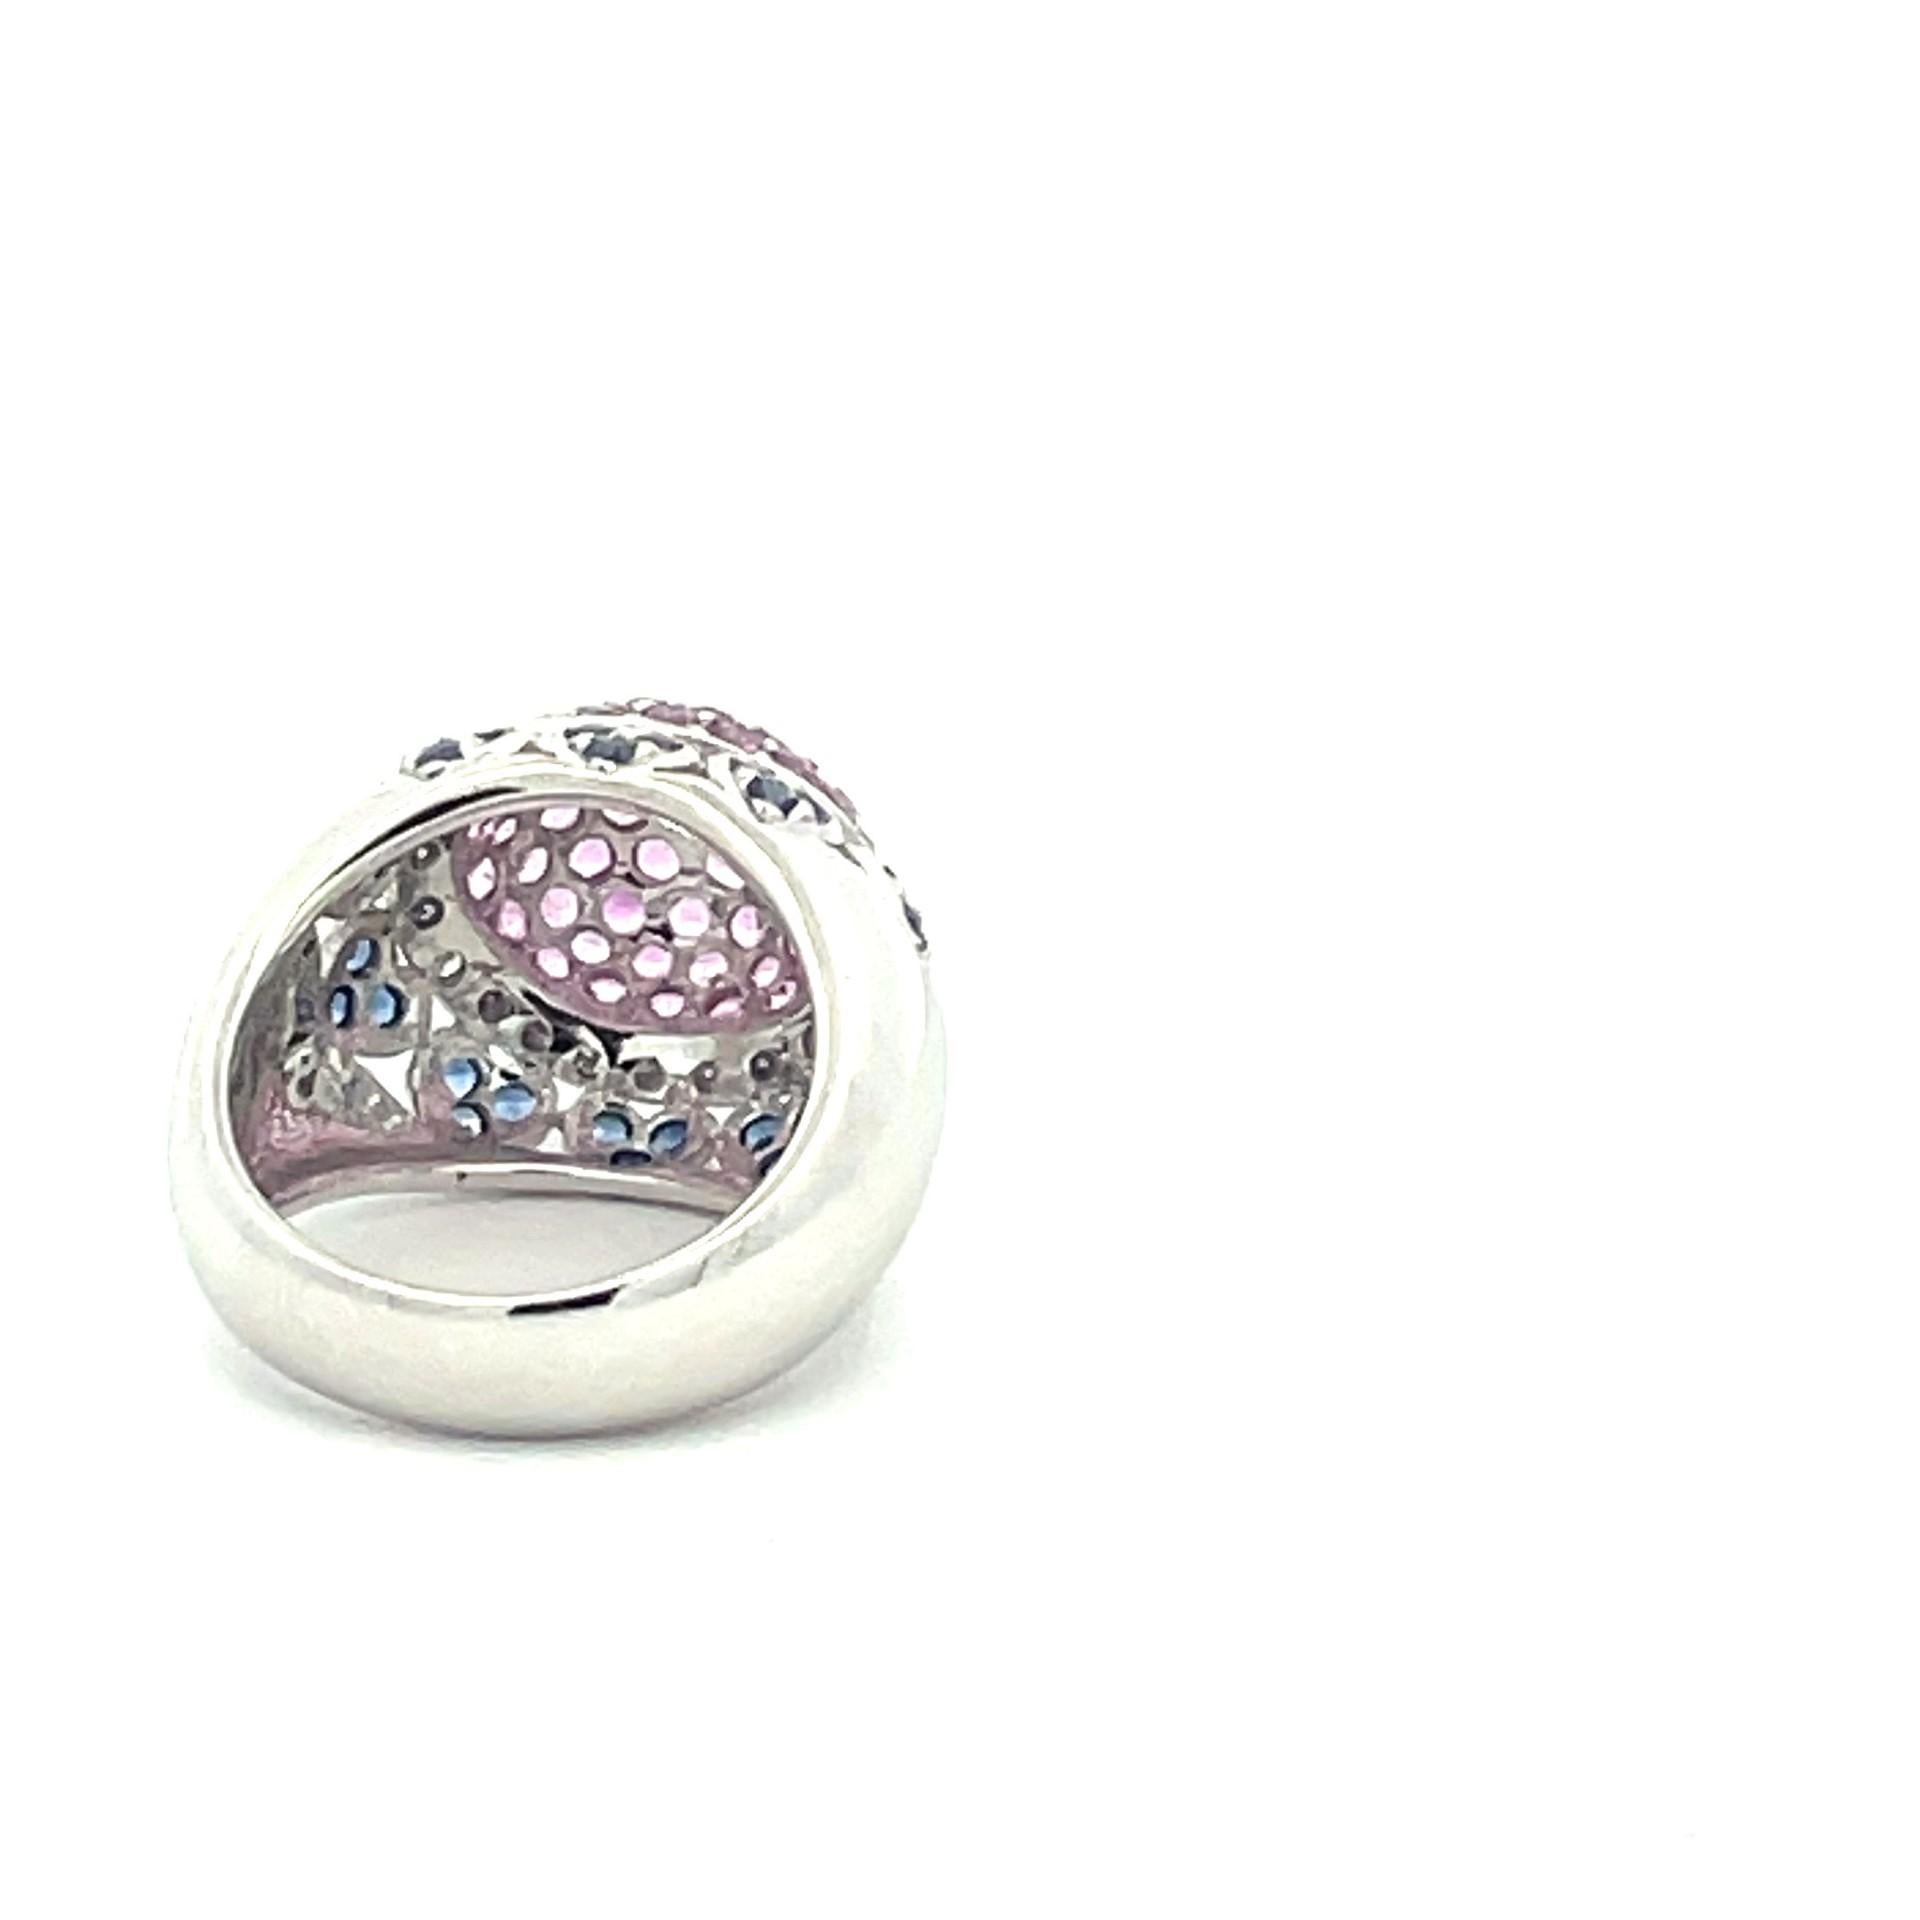 One dome ring set in centre with natural pink sapphires surrounded by a row of brilliant cut white diamonds and below that a row of heart motif set with natural blue sapphires  in 18kt white gold. 

56 natural pink sapphires 2.52ct total weight

30